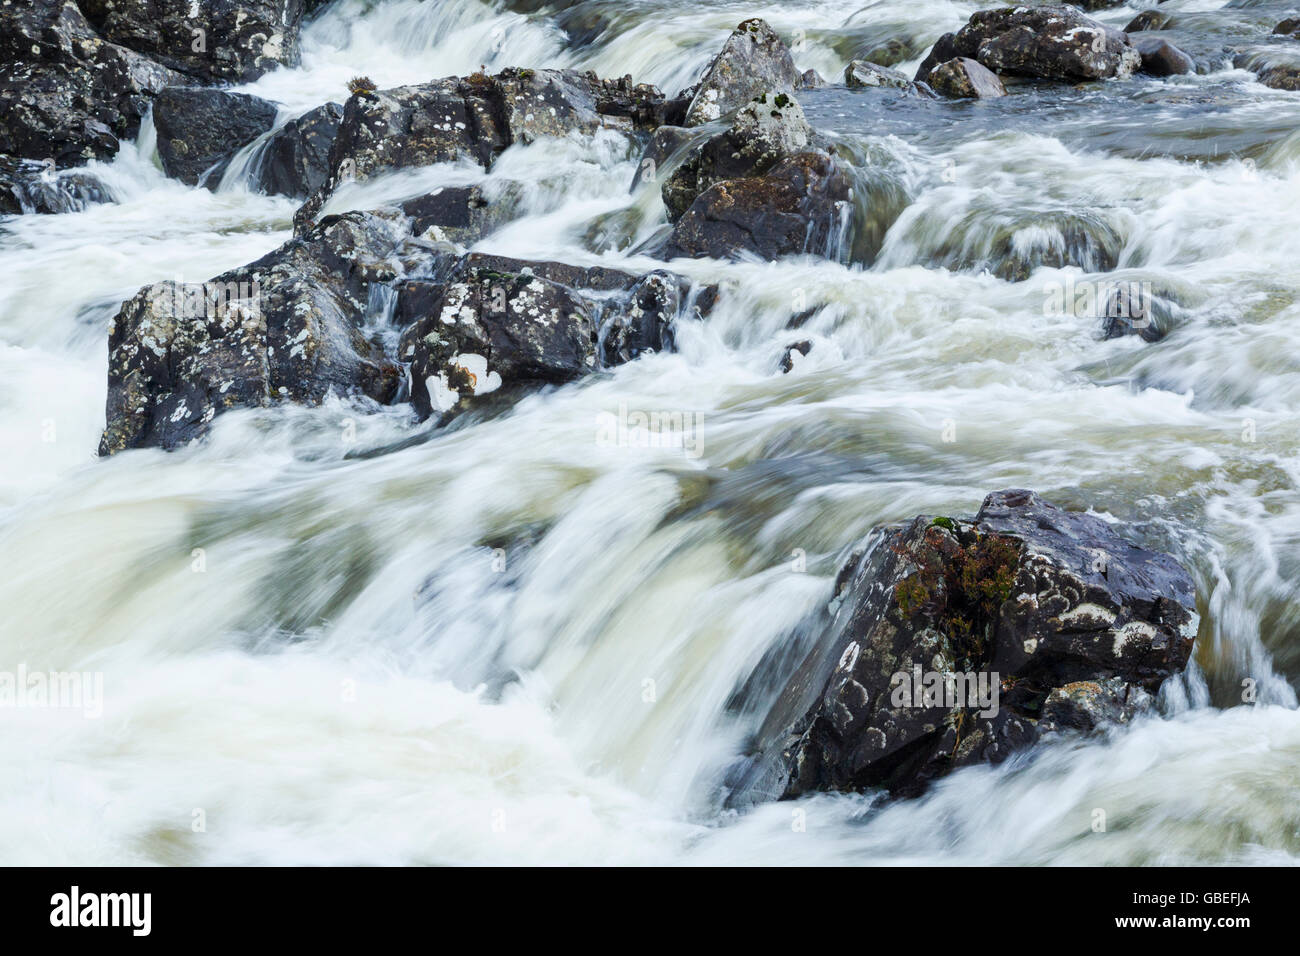 Energetic and aggressive river flowing between boulders Stock Photo